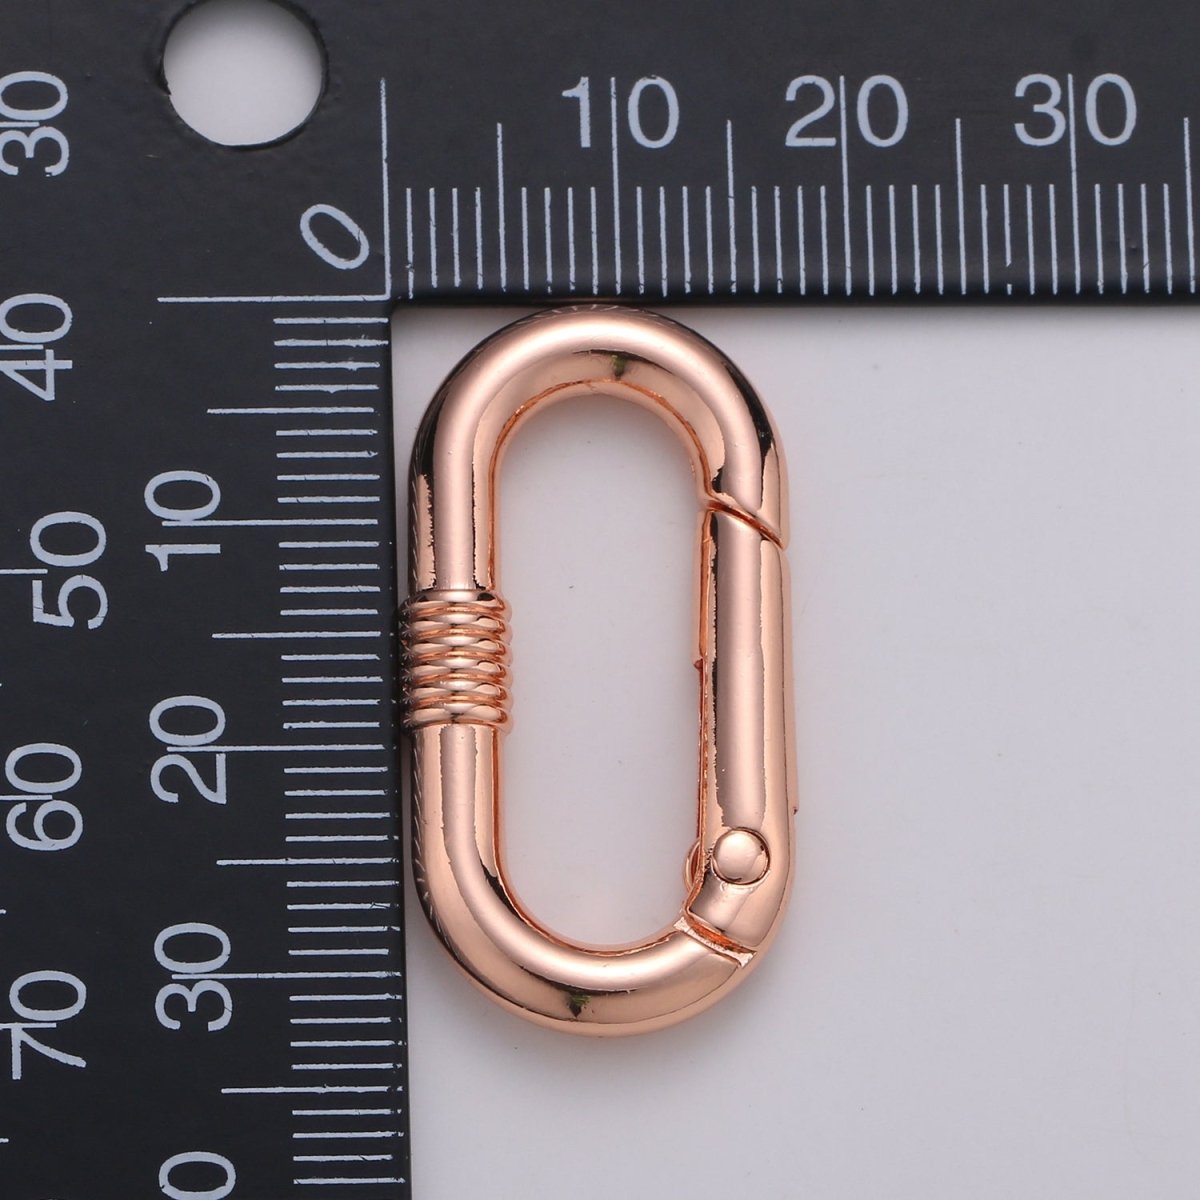 Chunky Gold Spring Gate Ring, Push Gate ring, 17x30mm Oval Ring, Charm Holder 24K Gold Filled Clasp for Link Chain Connector L-024 - L-027 - DLUXCA